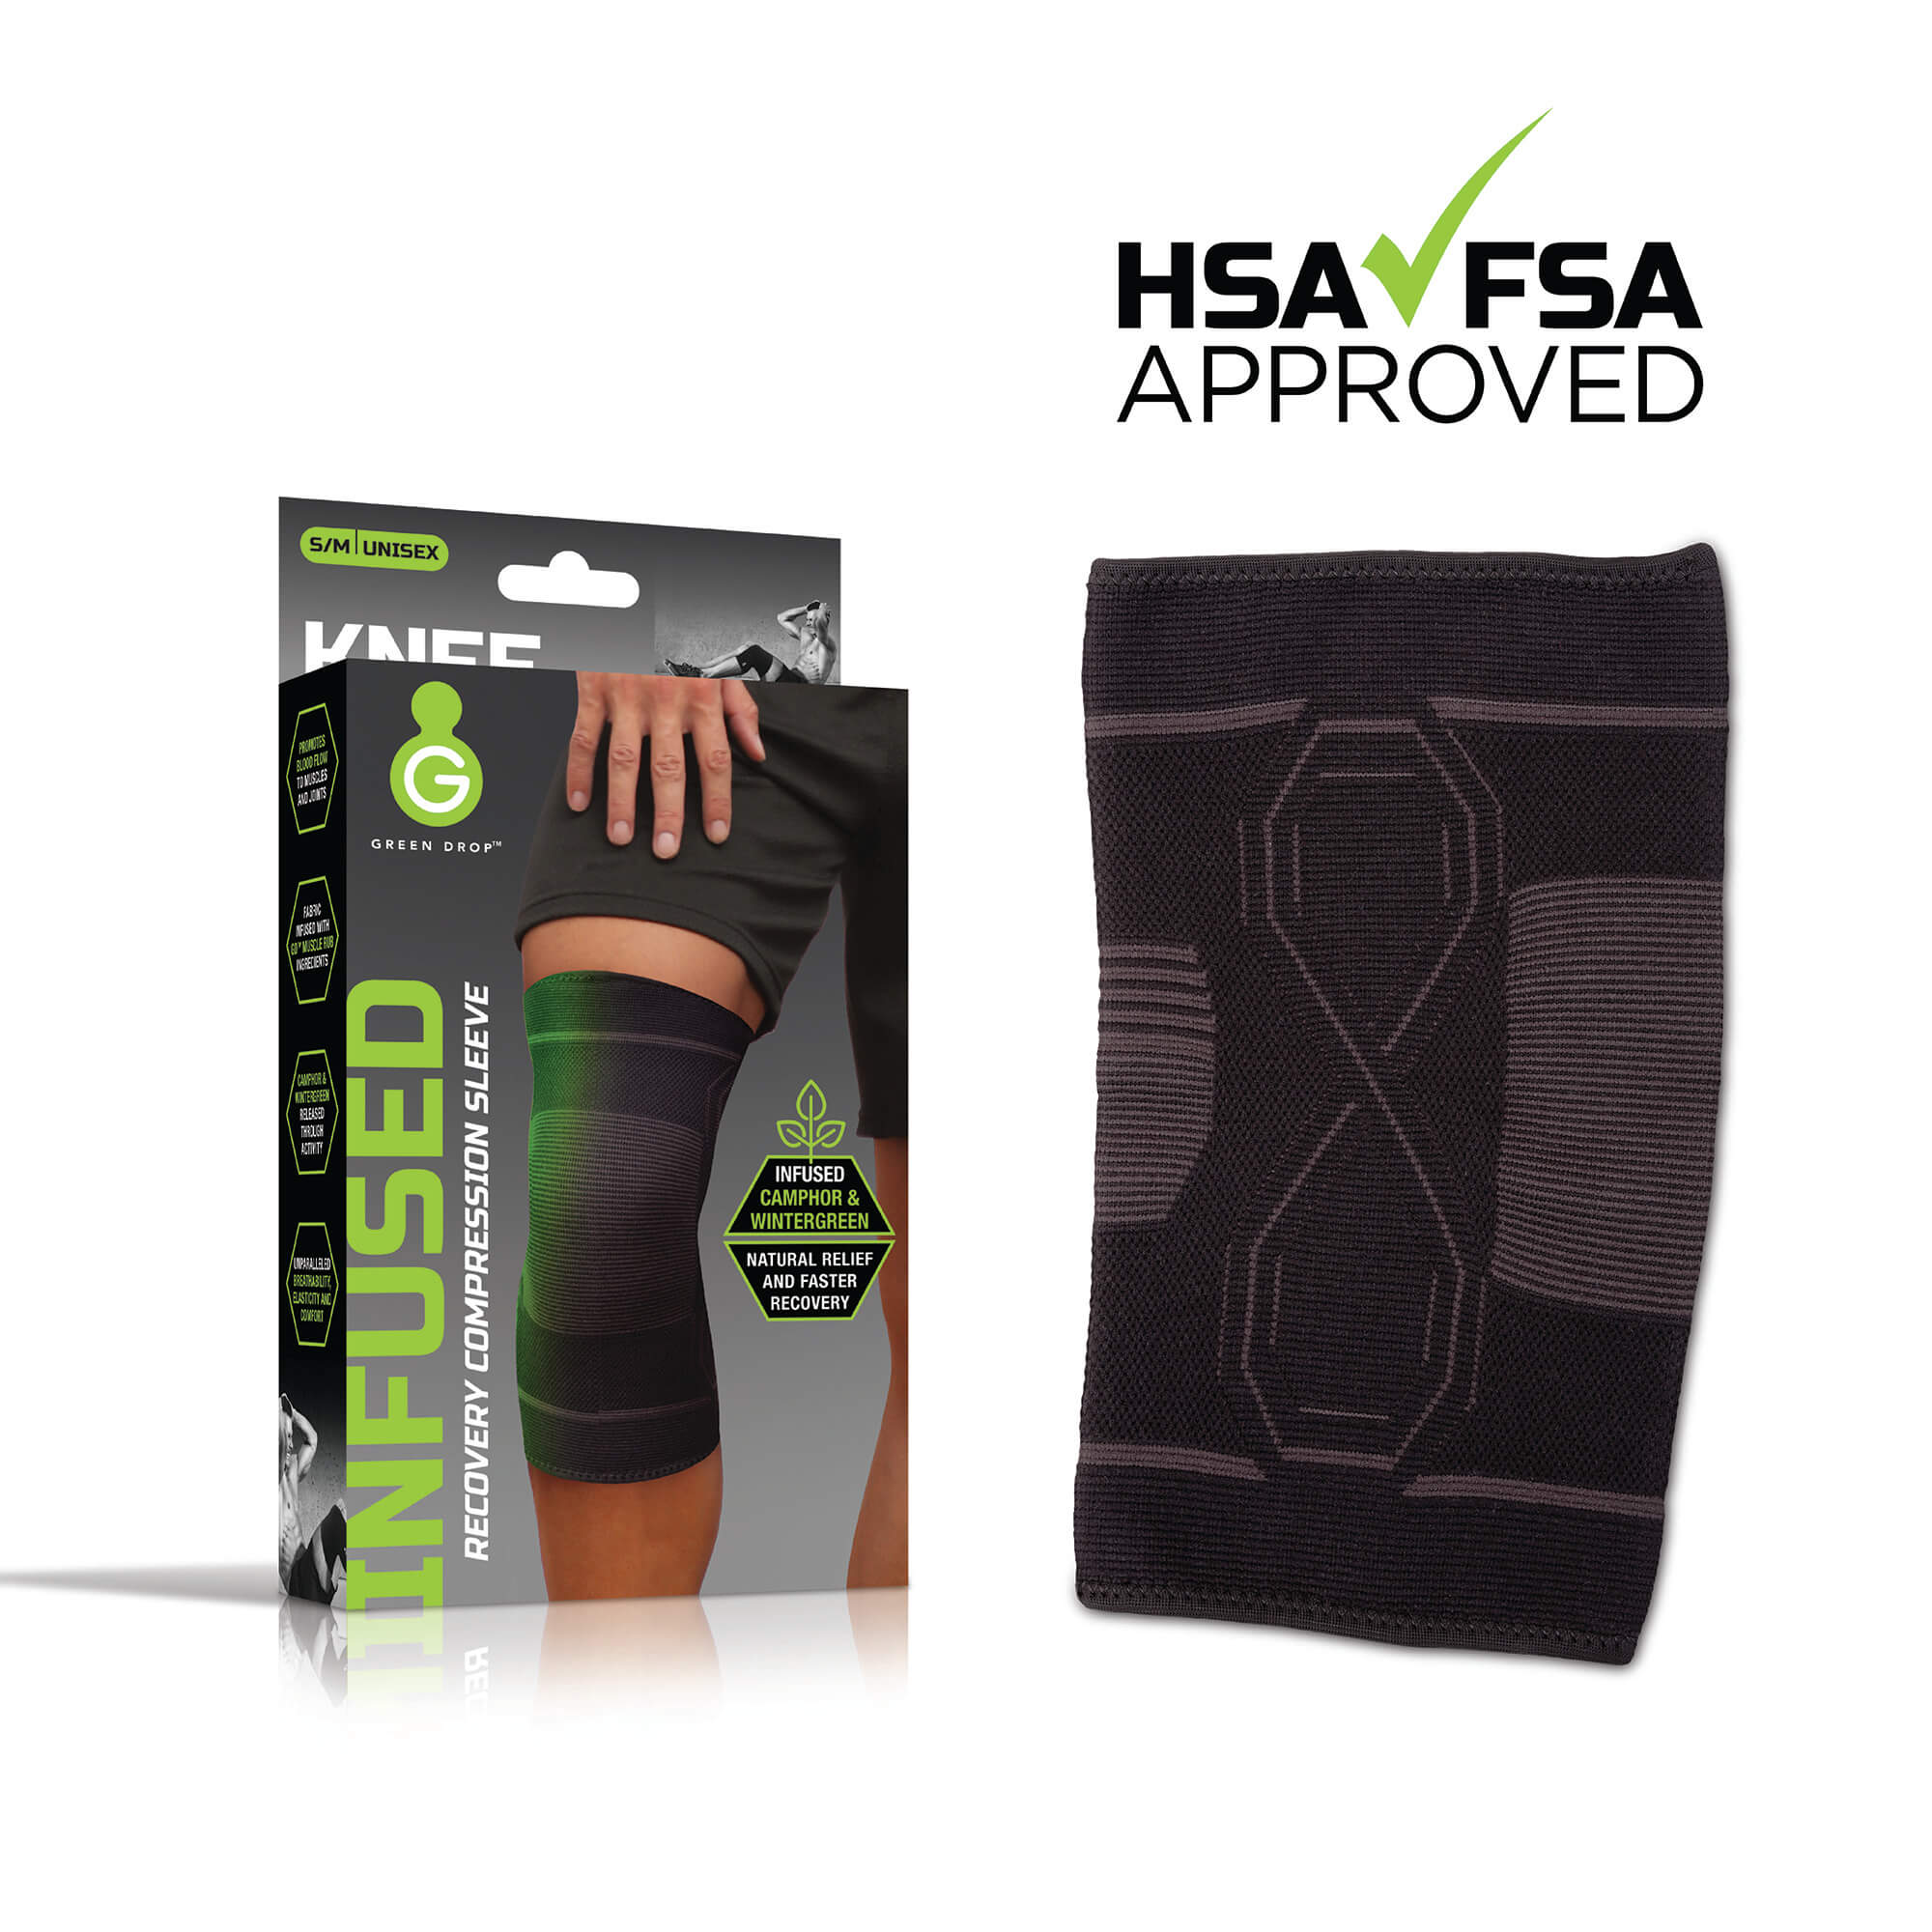 Copper Fit ICE Knee Compression Sleeve Infused with Georgia